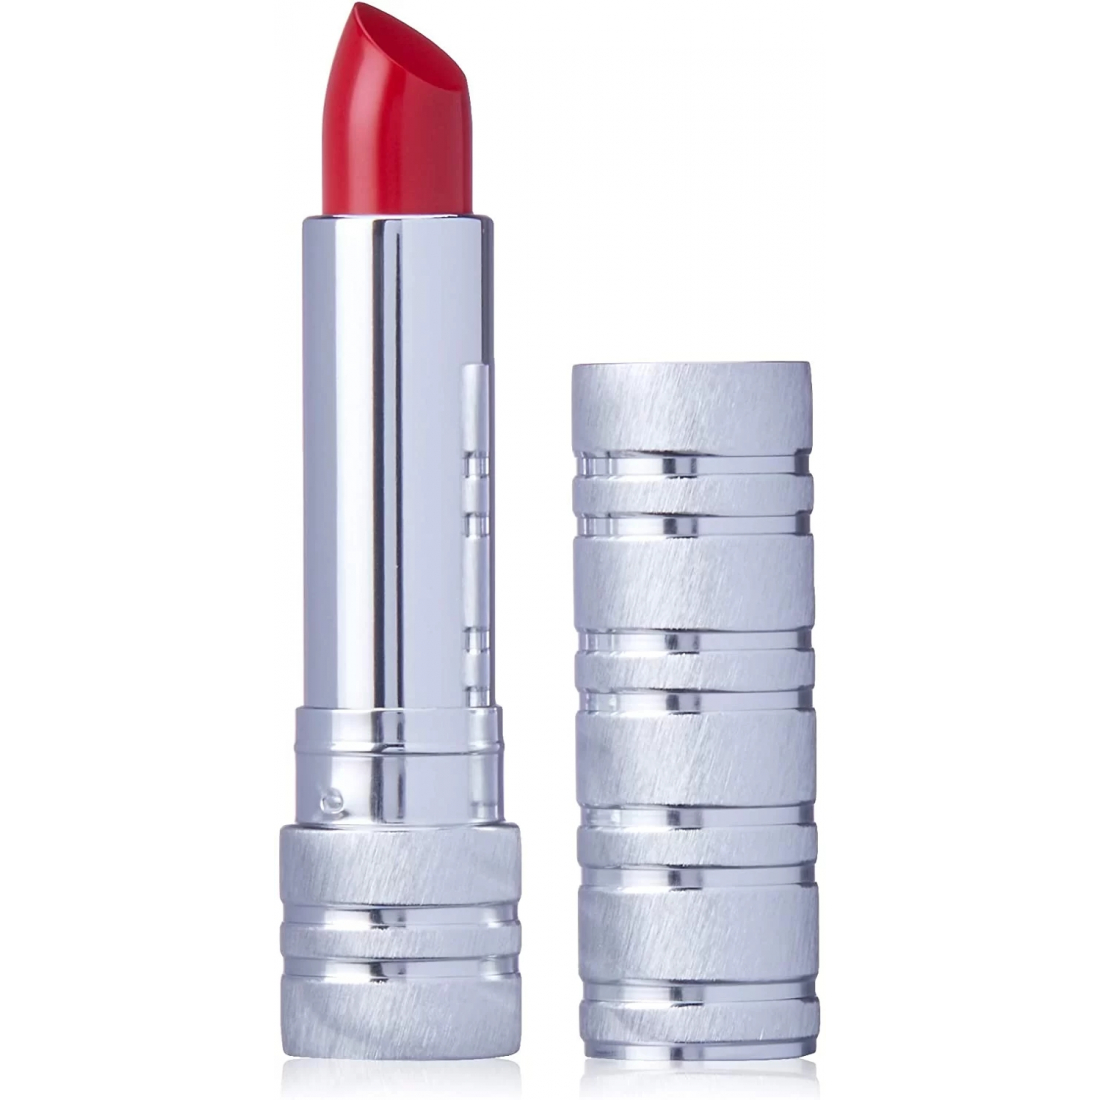 'High Impact' Lipstick - 12 Red-y To Wear 3.5 g